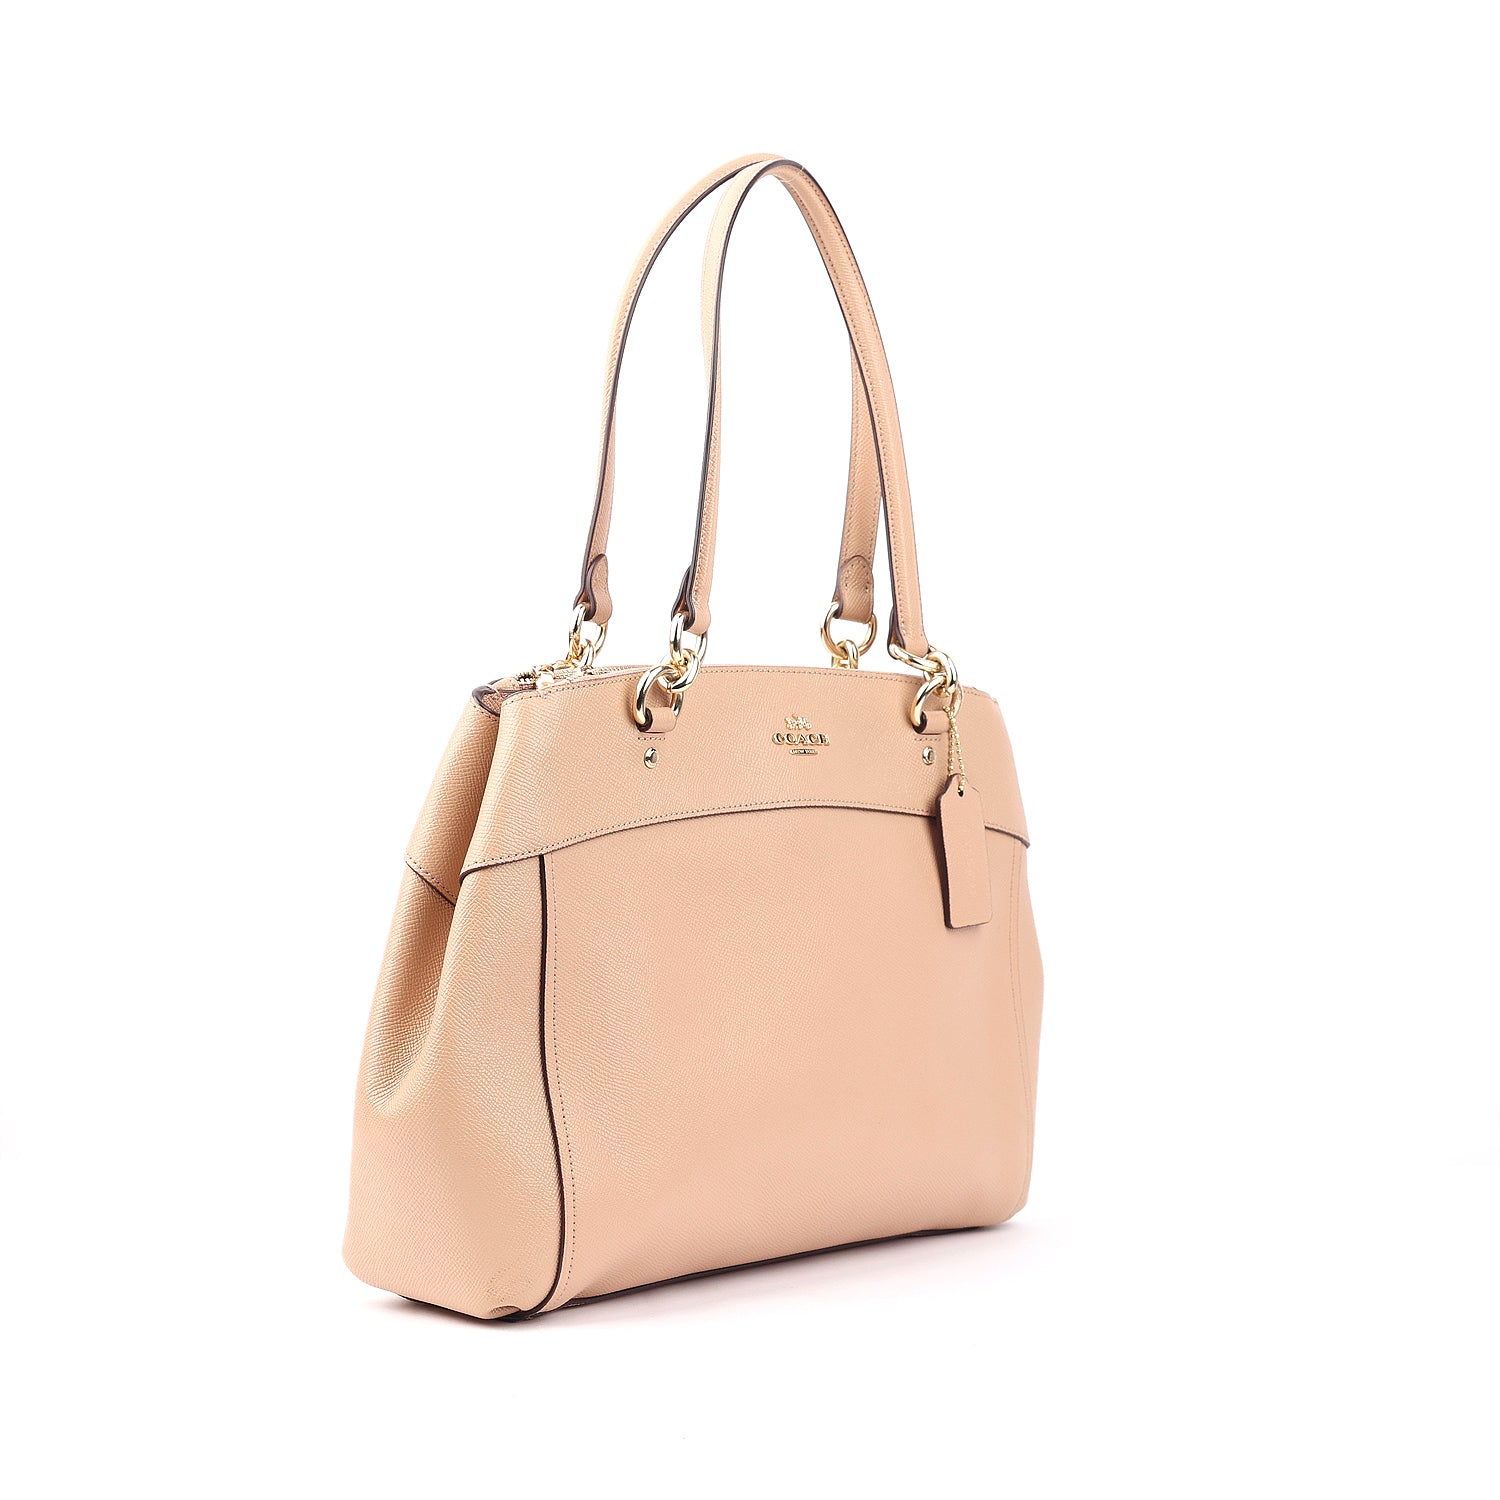 Salmon Pink Leather Brooke Carryall Satchel